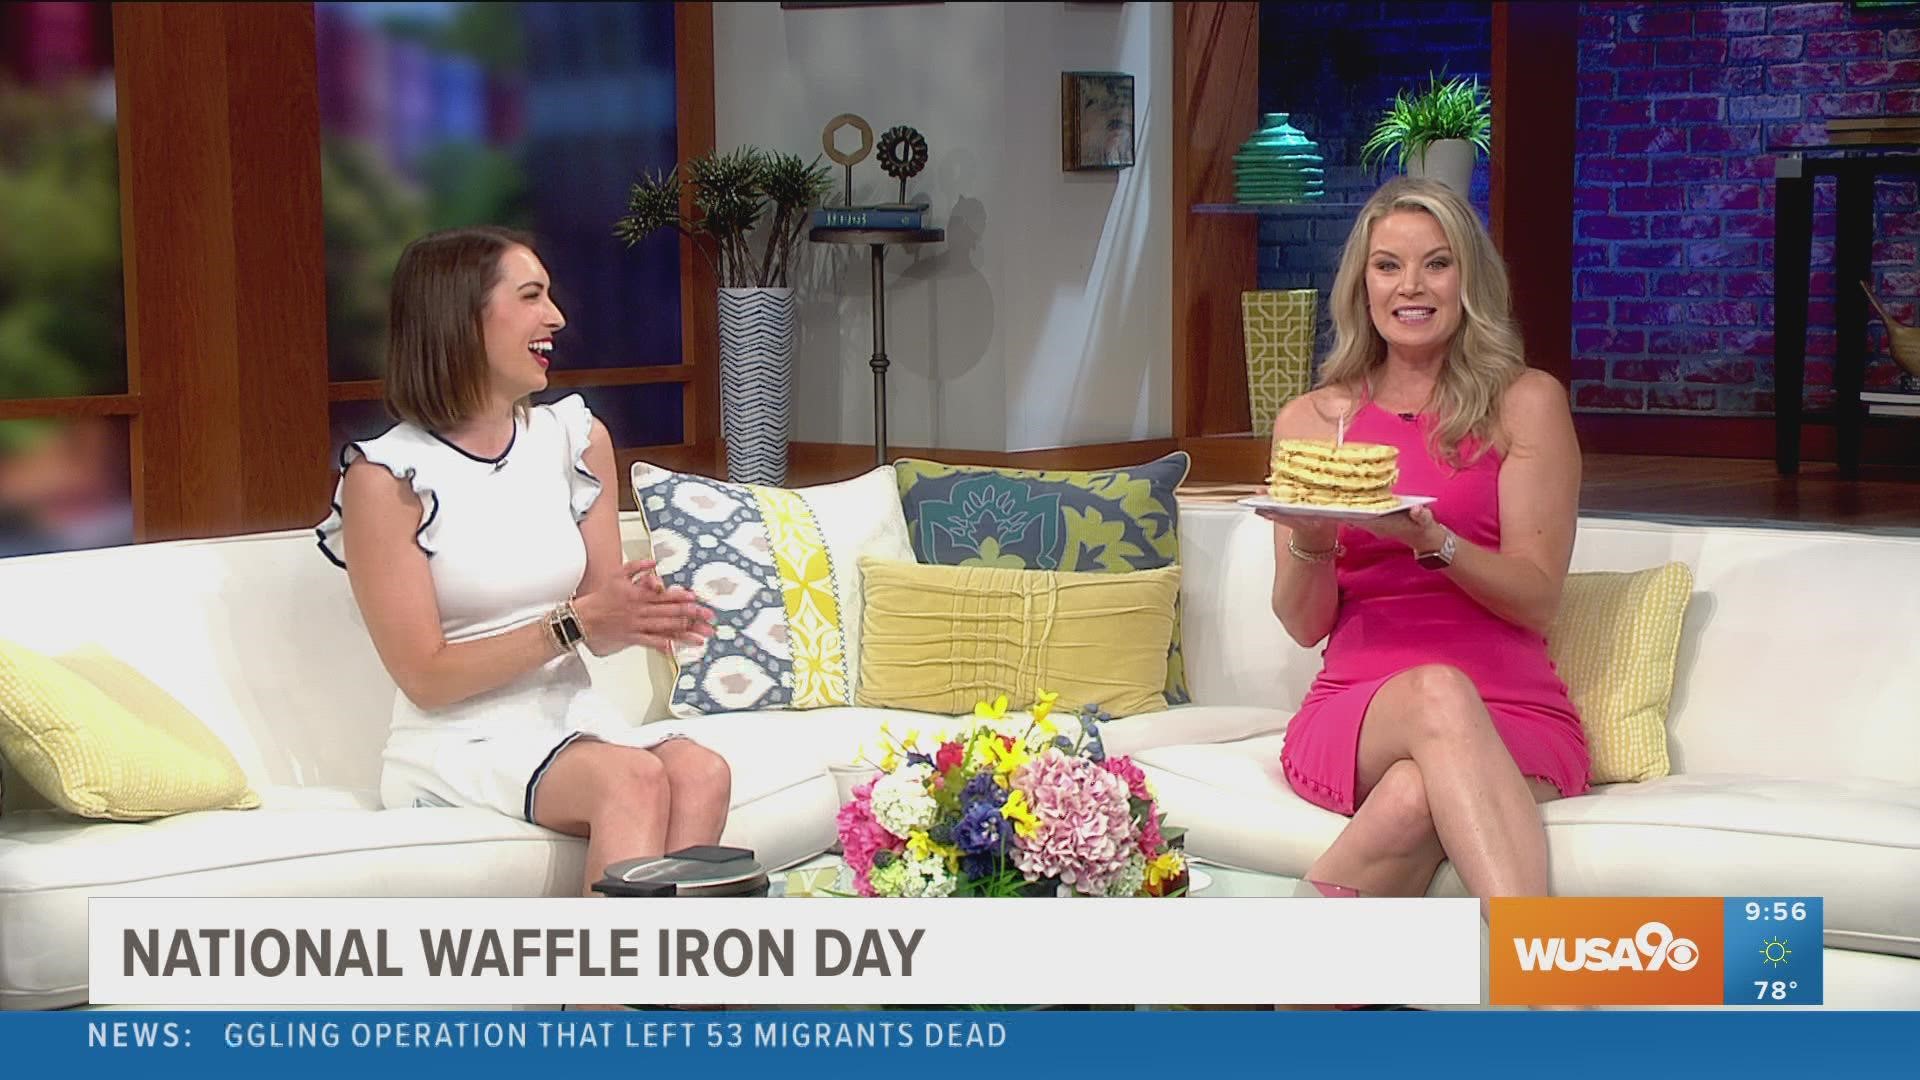 Ellen shares how she perfected making waffles during the pandemic in honor of National Waffle Day and we celebrate Kristen's birthday!